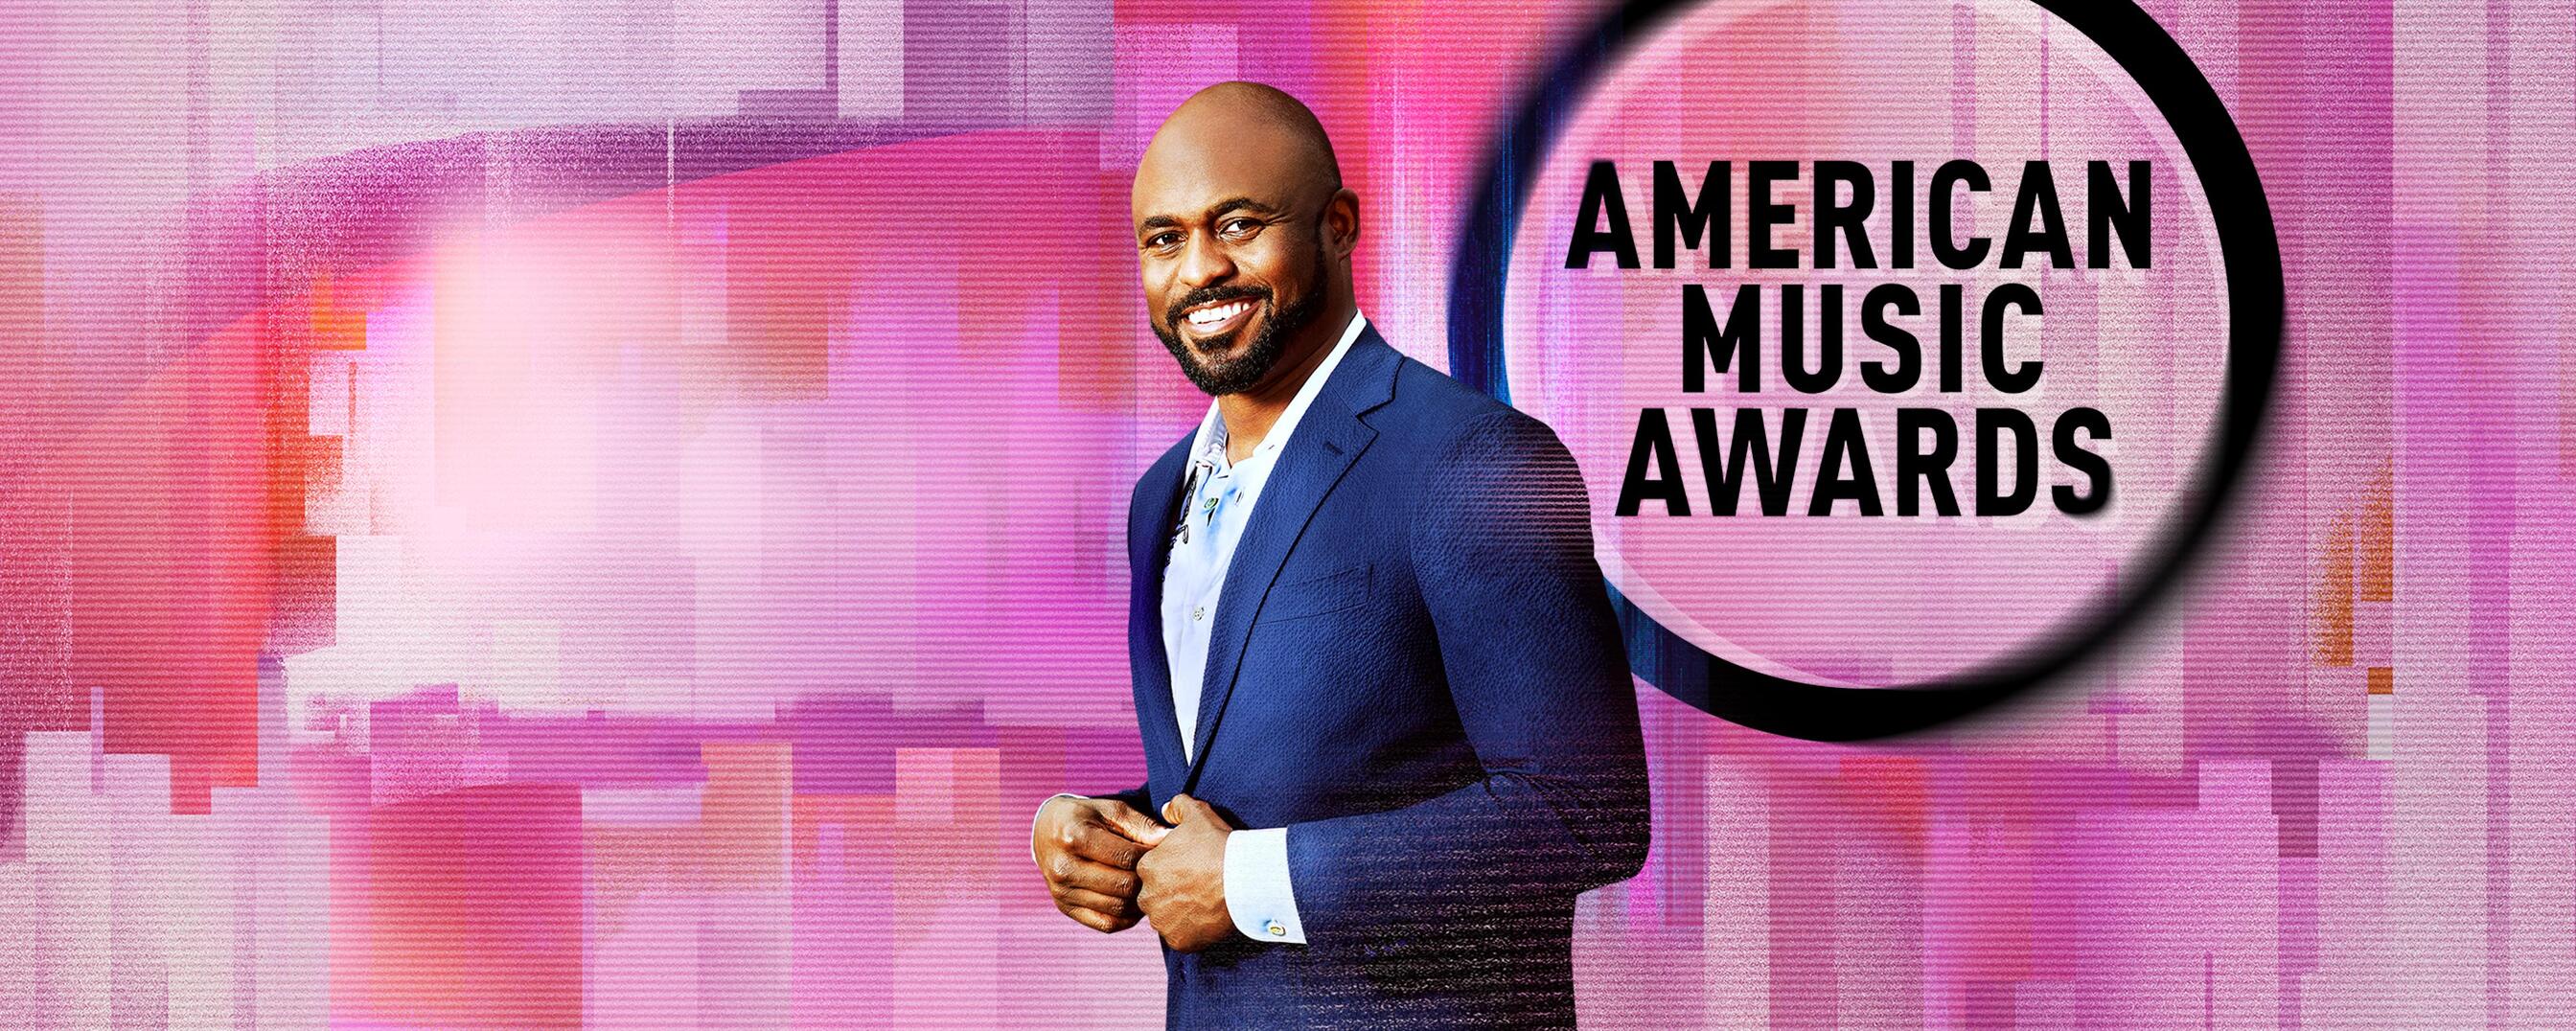 American Music Awards Shifts To Tuesday For 2018 Show On ABC – Deadline